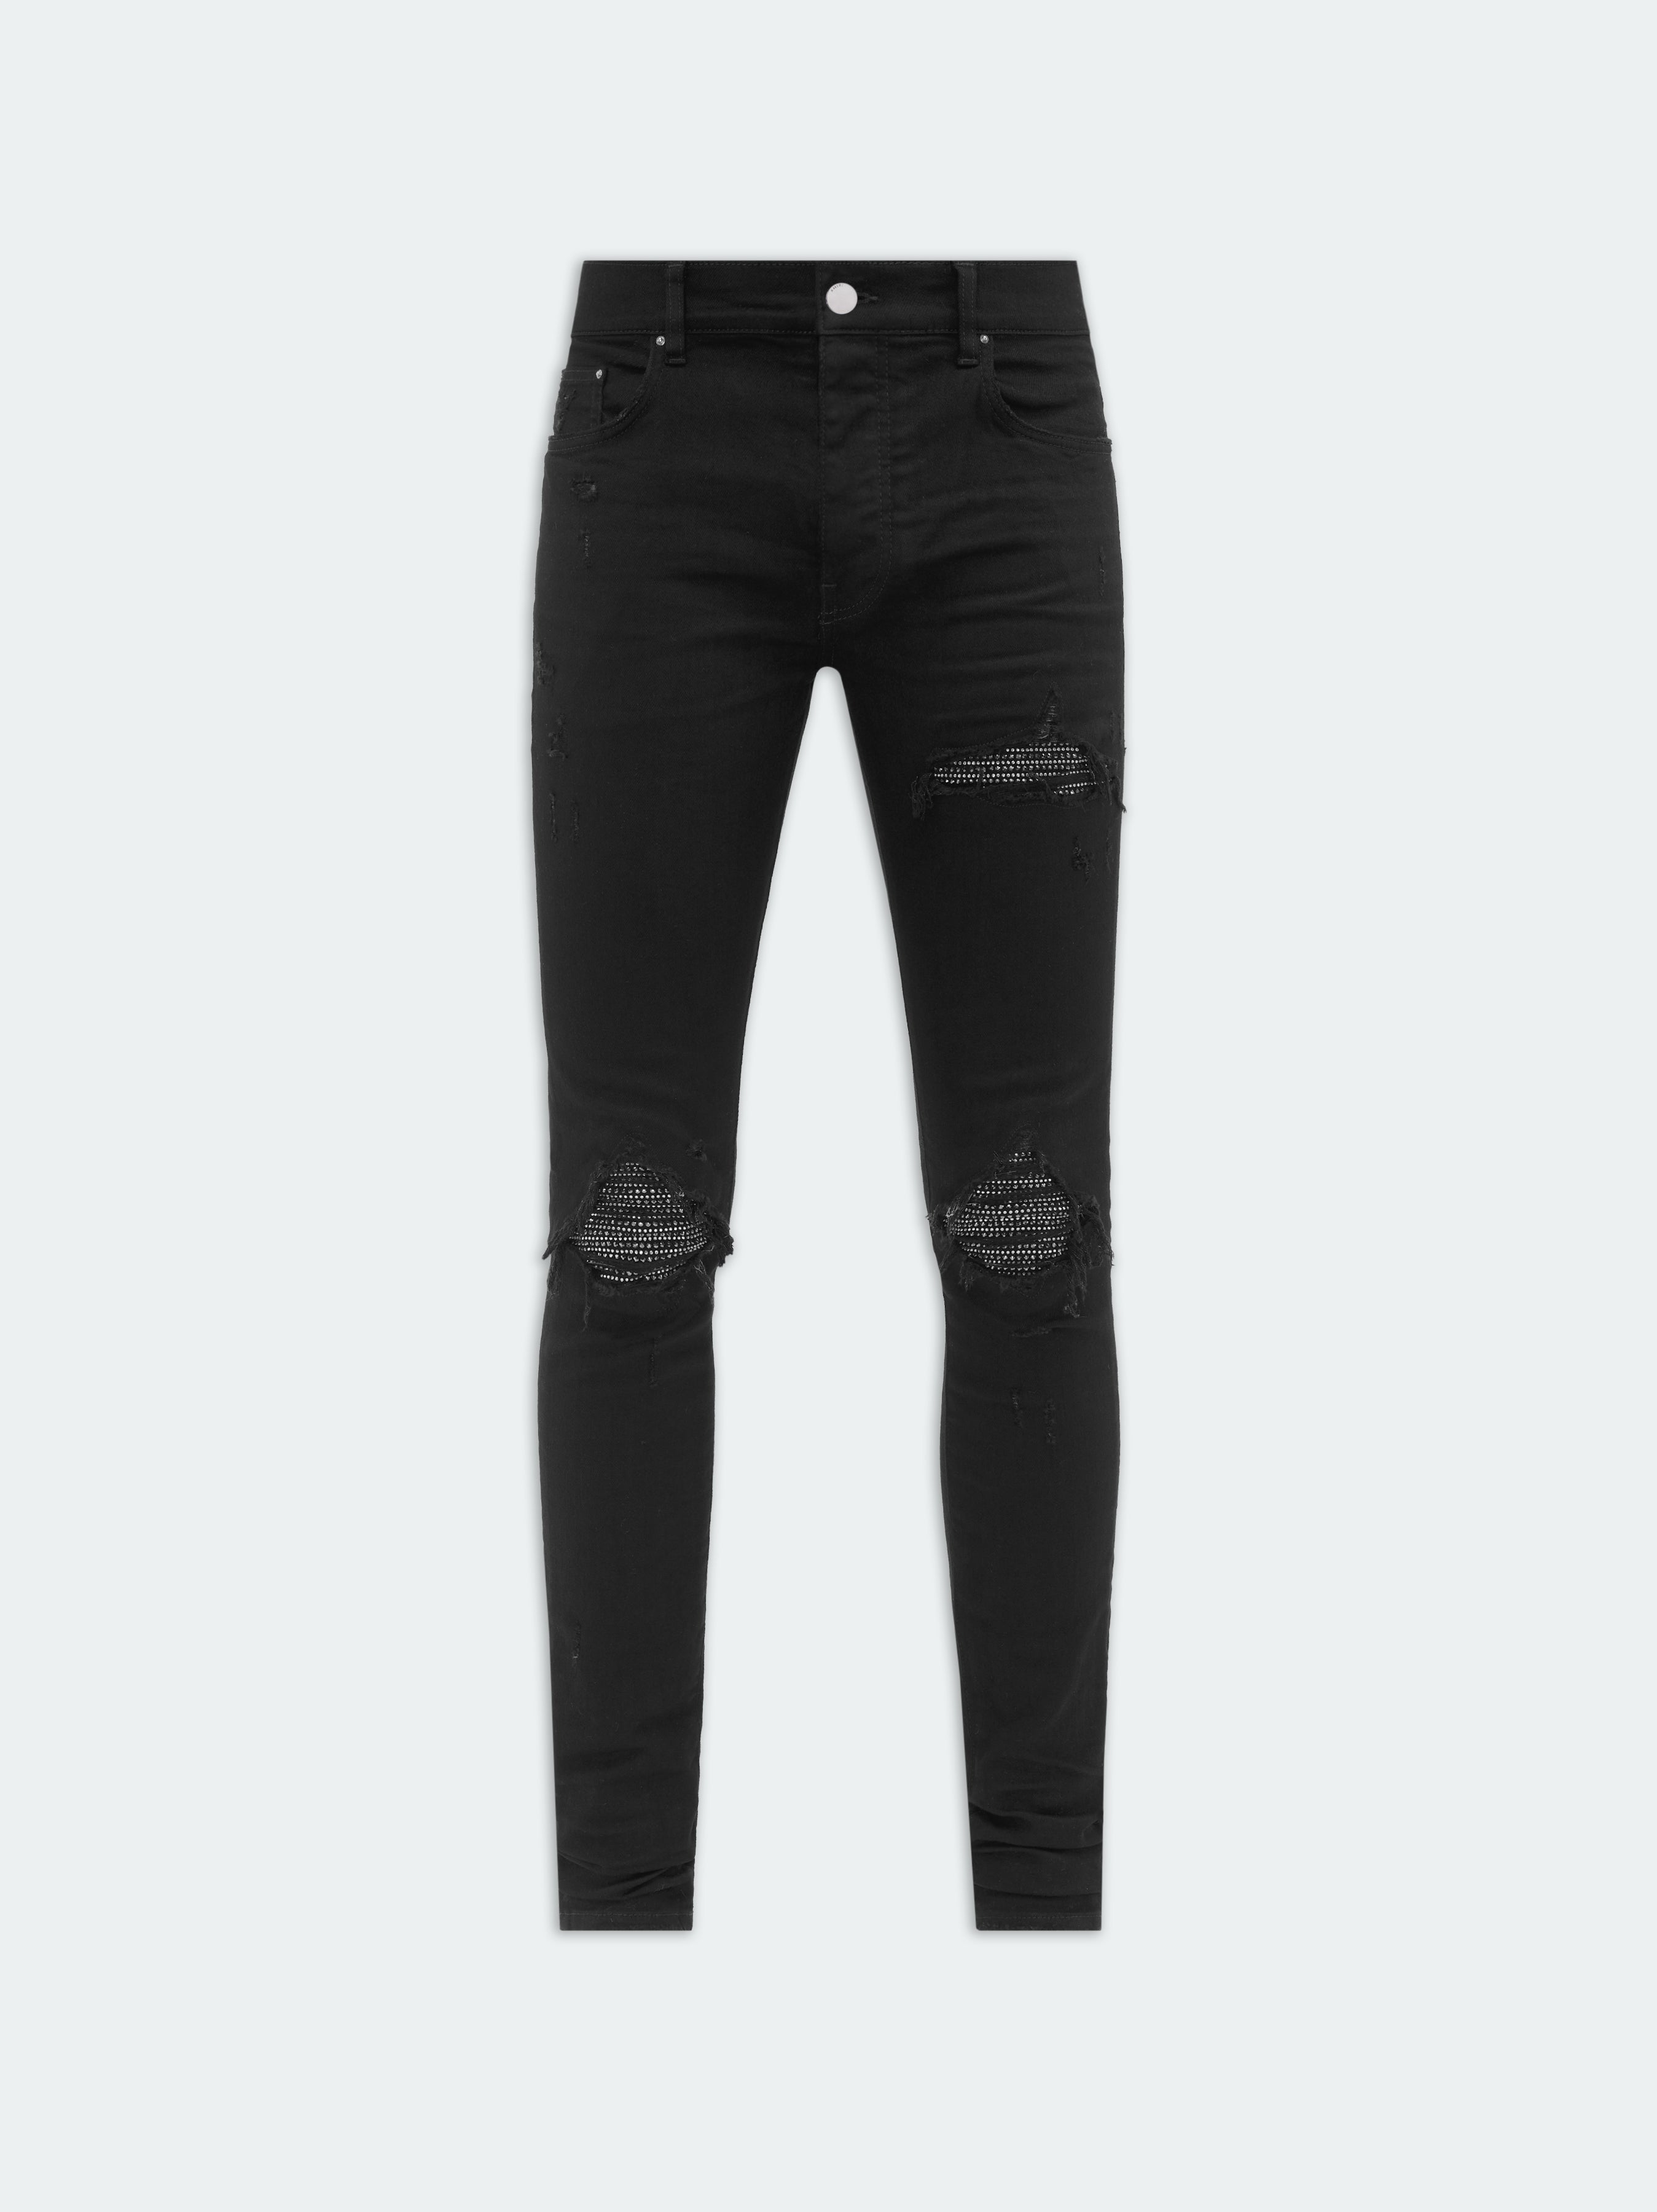 Product CRYSTAL MX1 JEAN - Black OD featured image